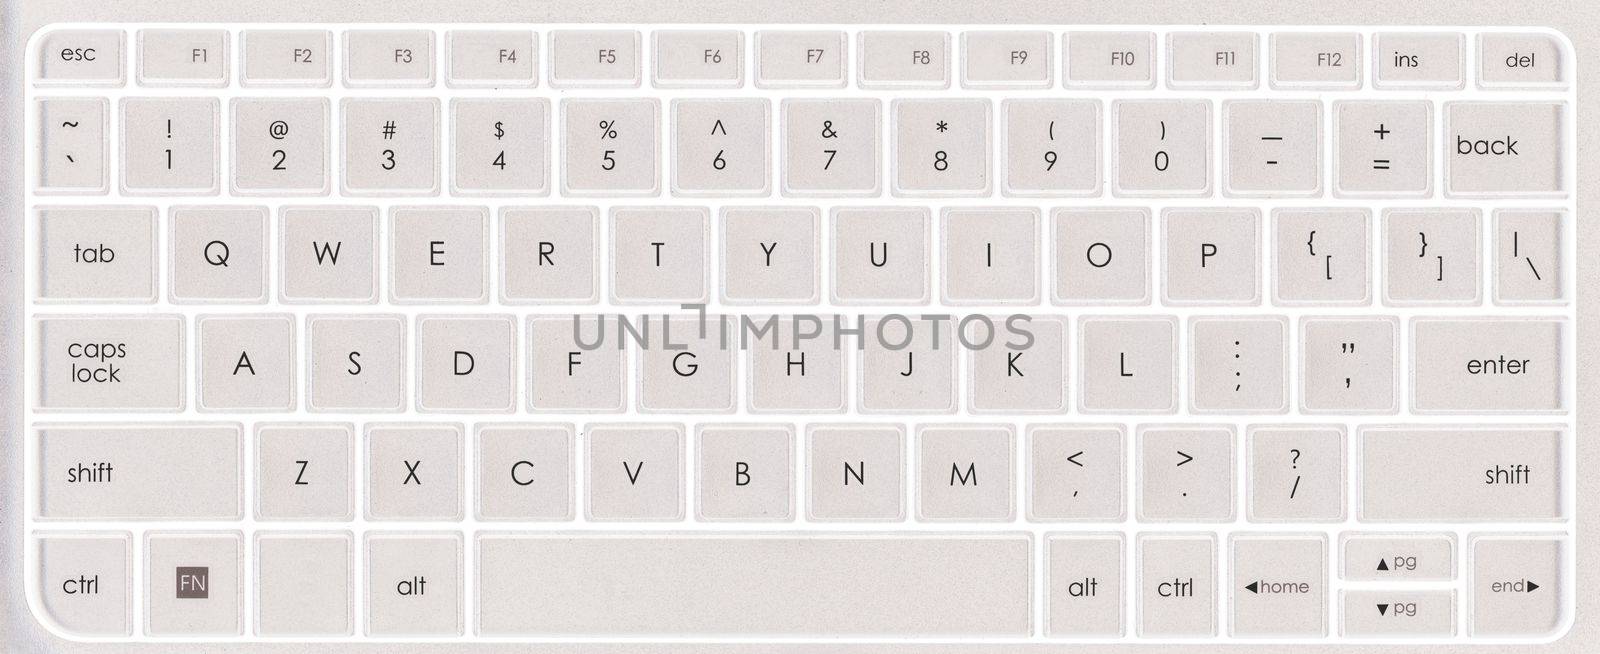 standard american qwerty keyboard for personal computer